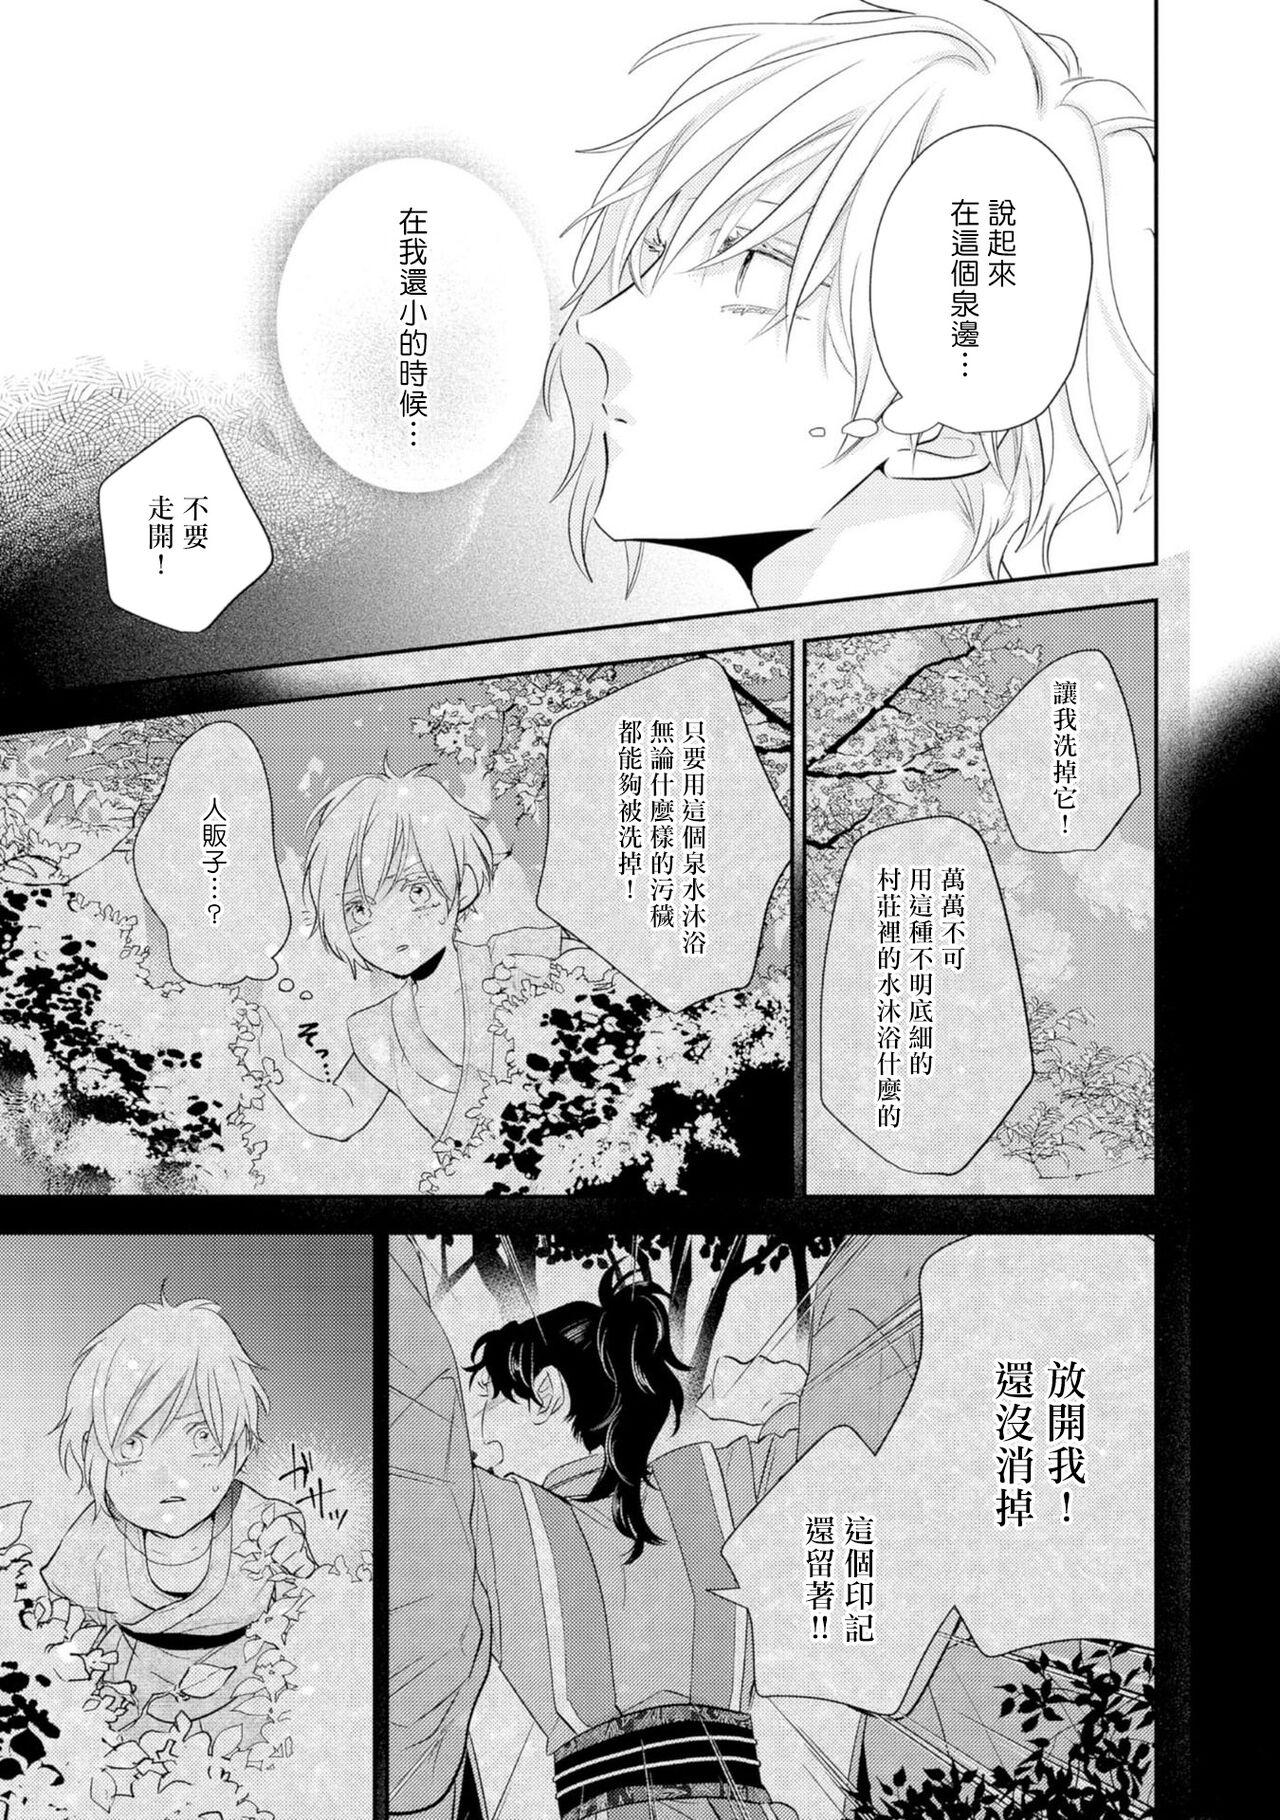 Asses 孤高的王与侍寝者之间的情爱 01 Gay Theresome - Page 4